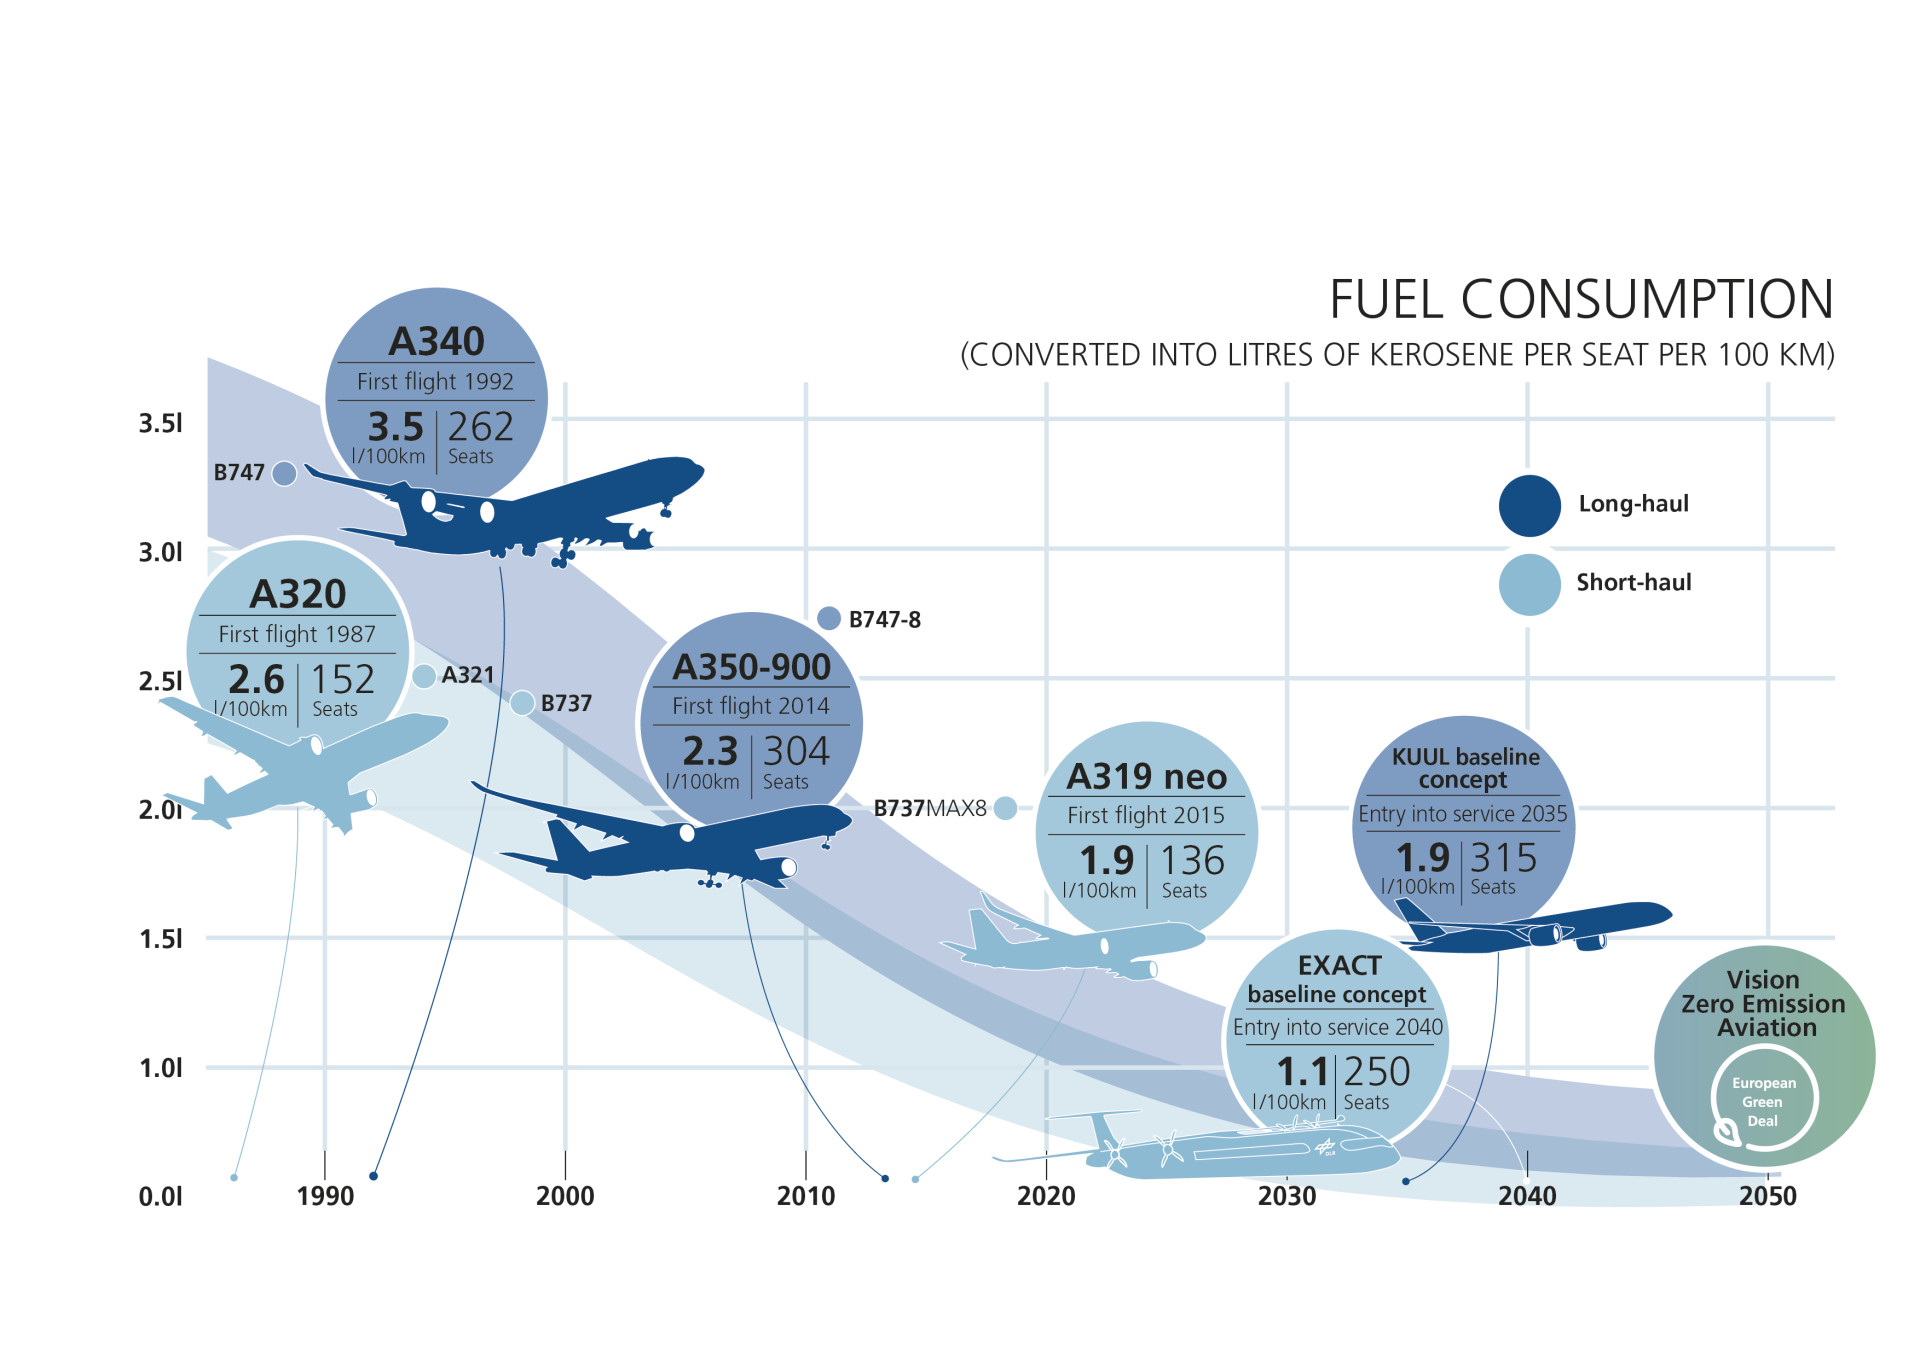 The illustration shows how fuel consumption in aviation decreased with new type of aircraft overtime.